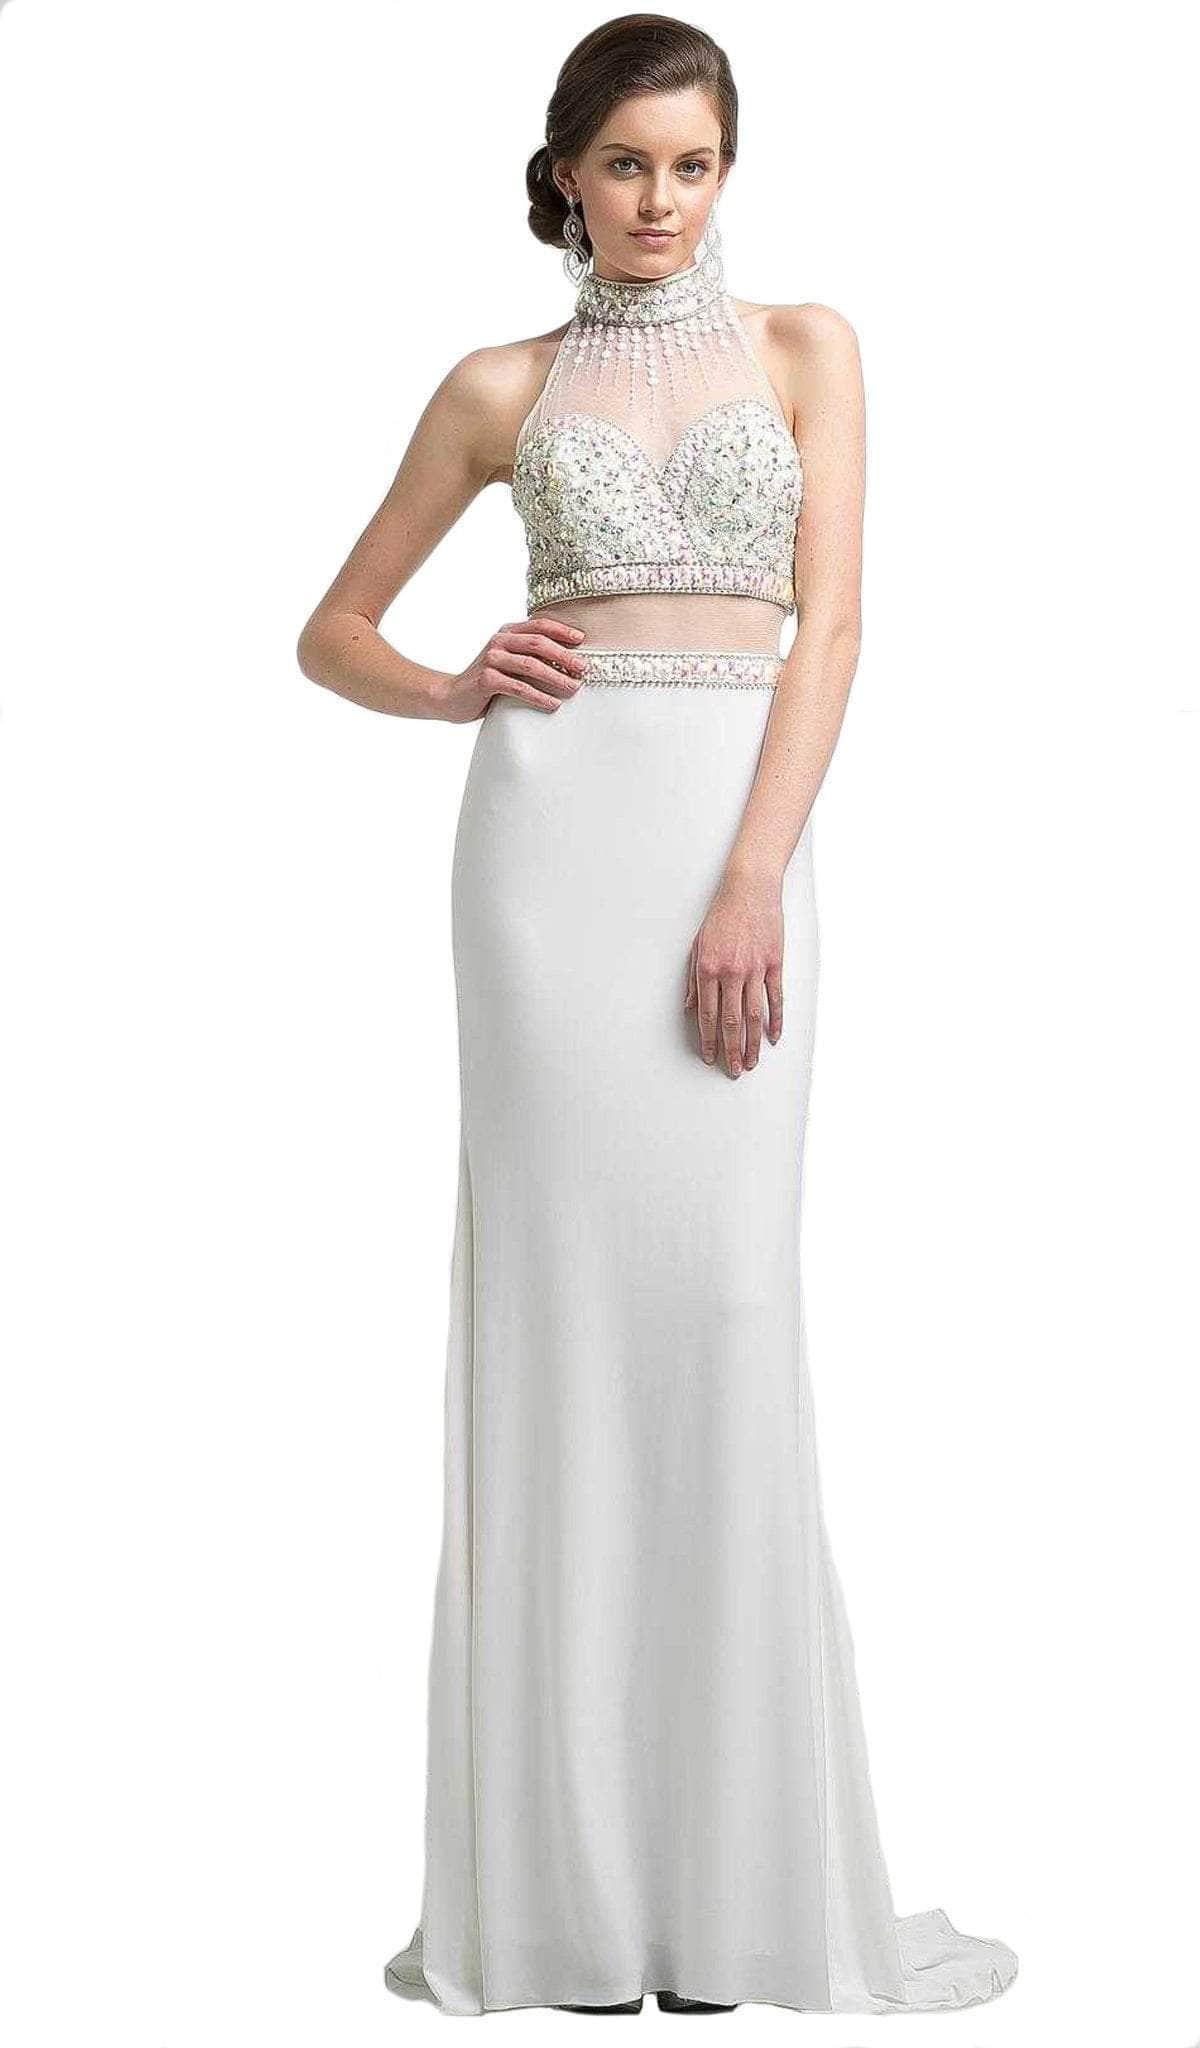 Image of Ladivine KD087 - Beaded High Neck Faux Two-Piece Sheath Long Gown